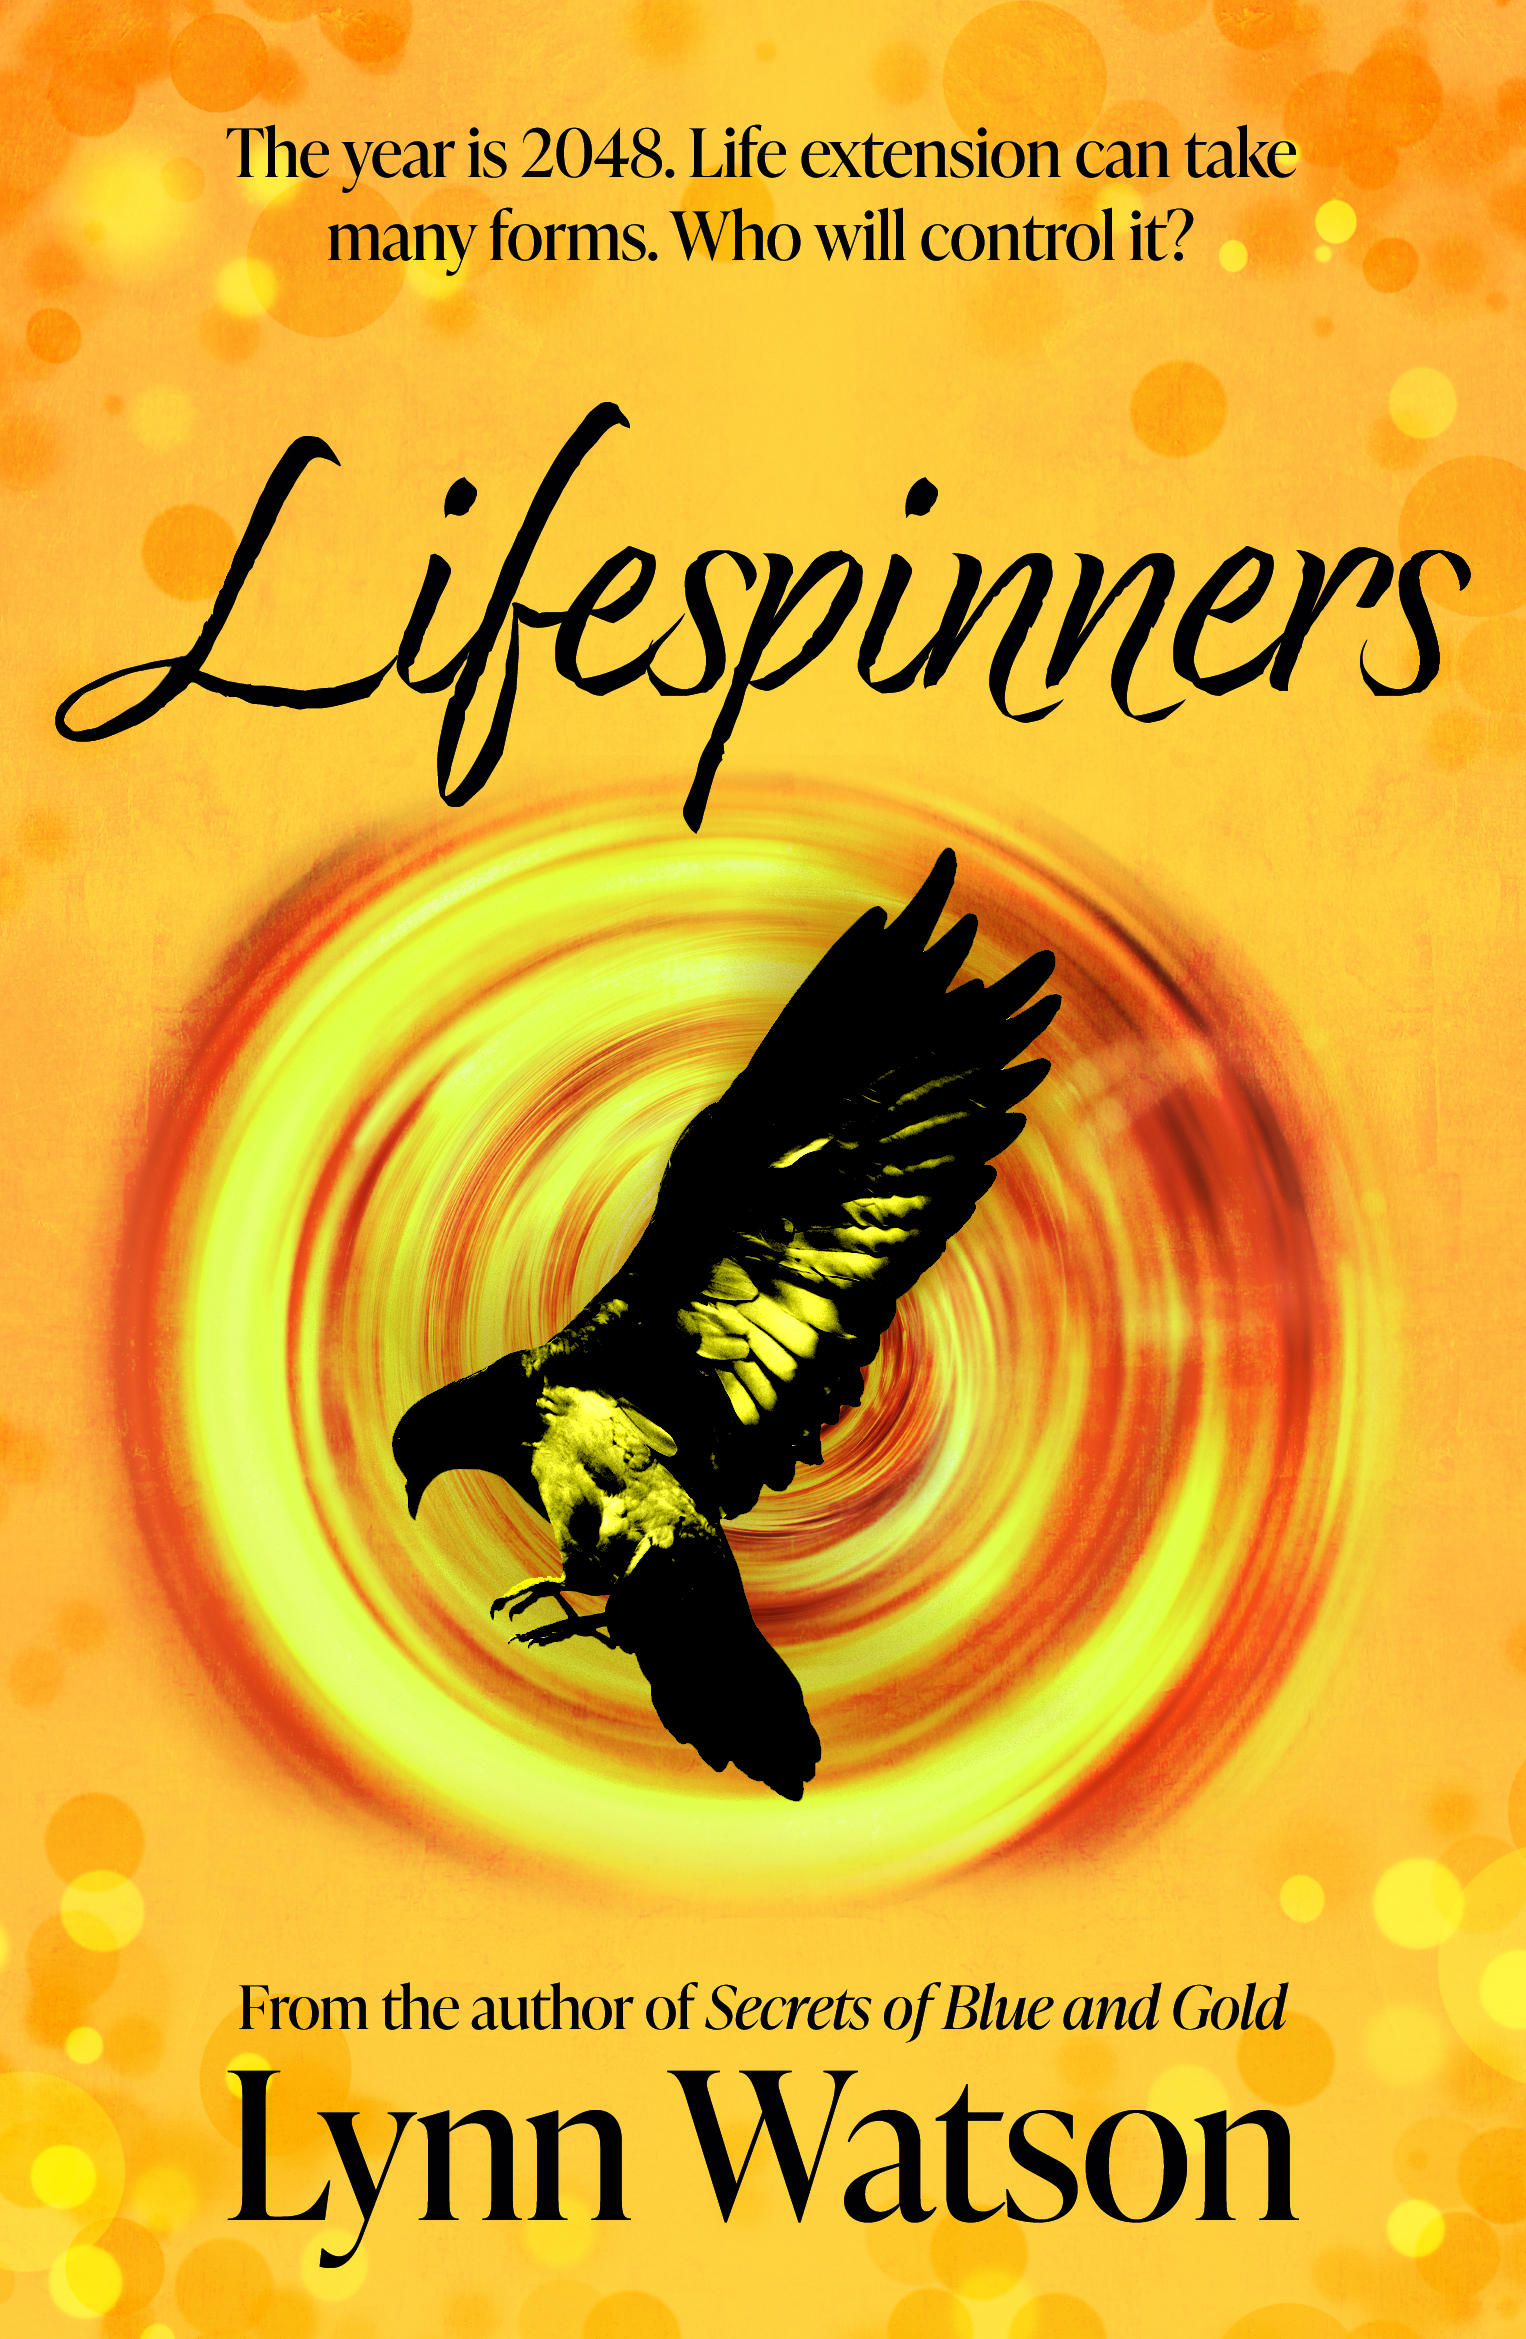 This is the front cover of the book, with the title Lifespinners, author name Lynn Watson and a strap-line saying: The year is 2048. Life extension can take many forms. Who will control it?